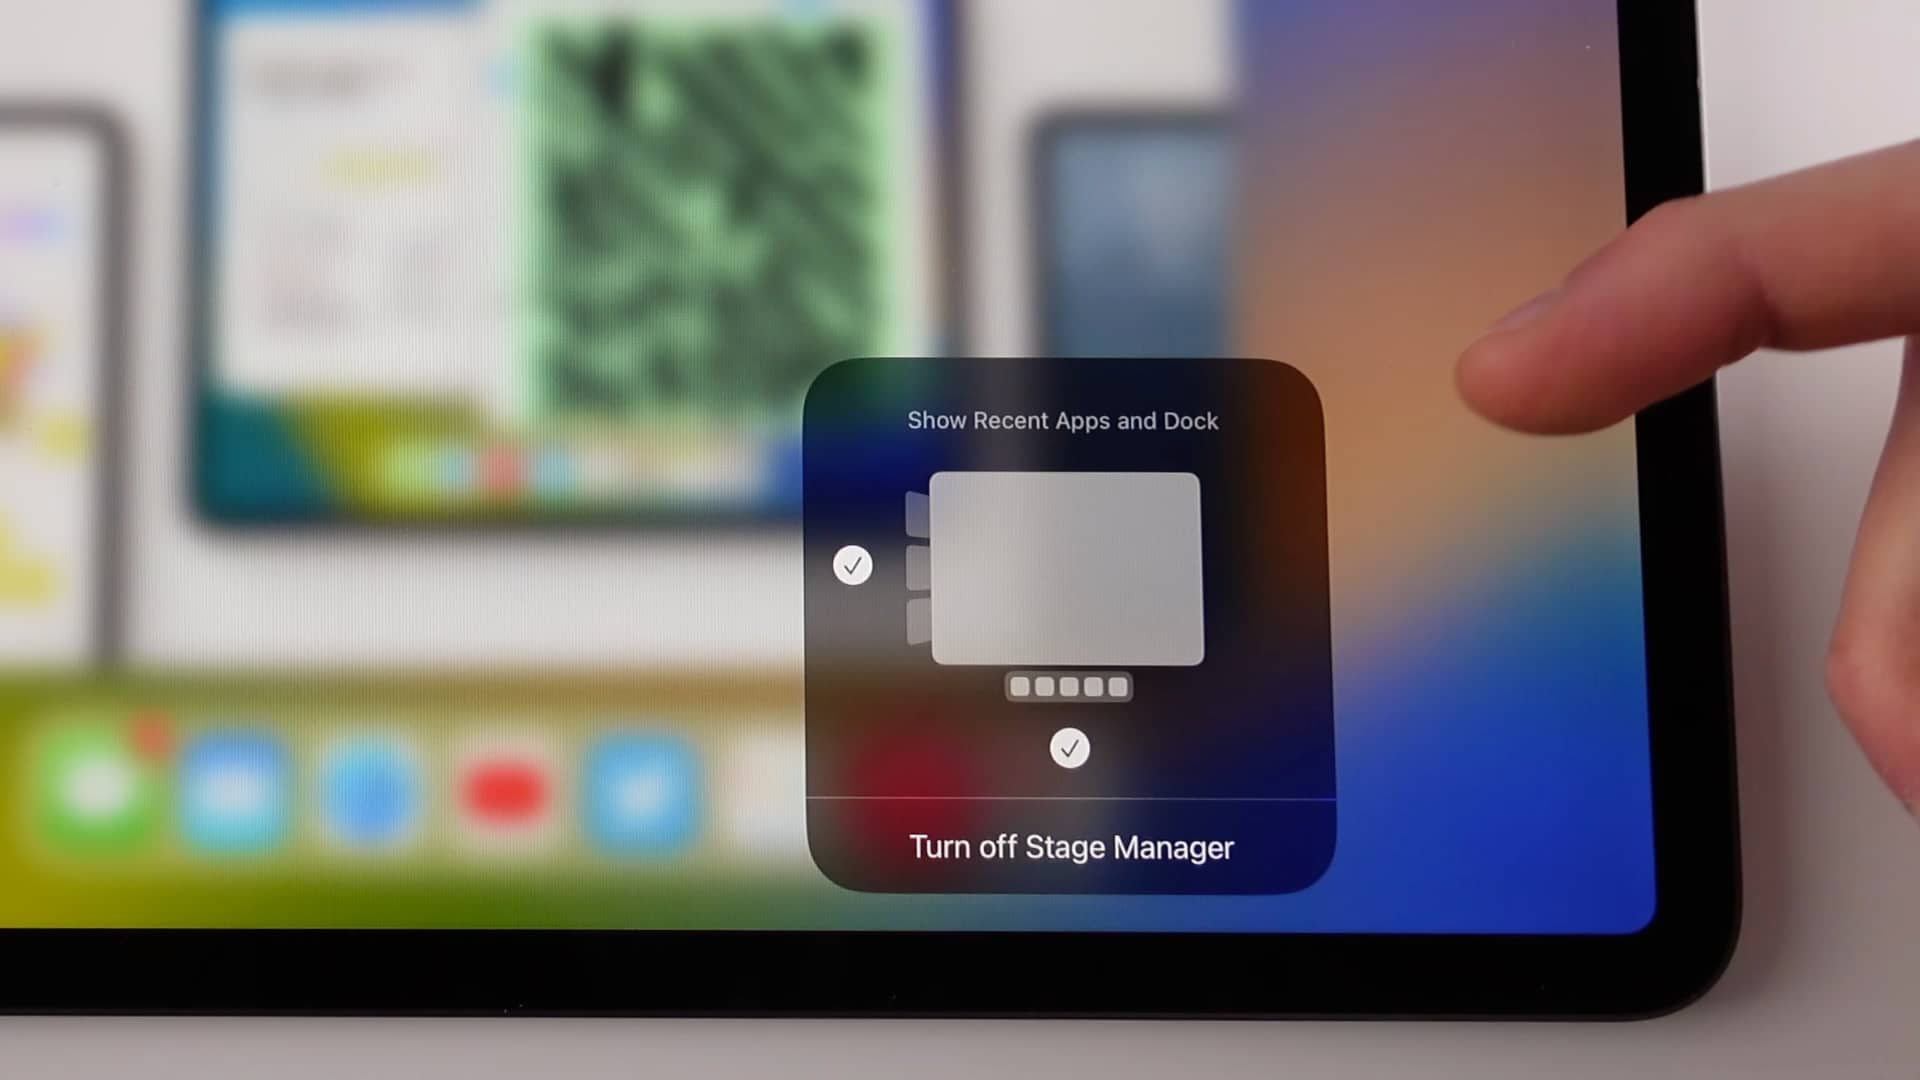 Using Control Center on iPad to hide the Dock and recent apps from Stage Manager